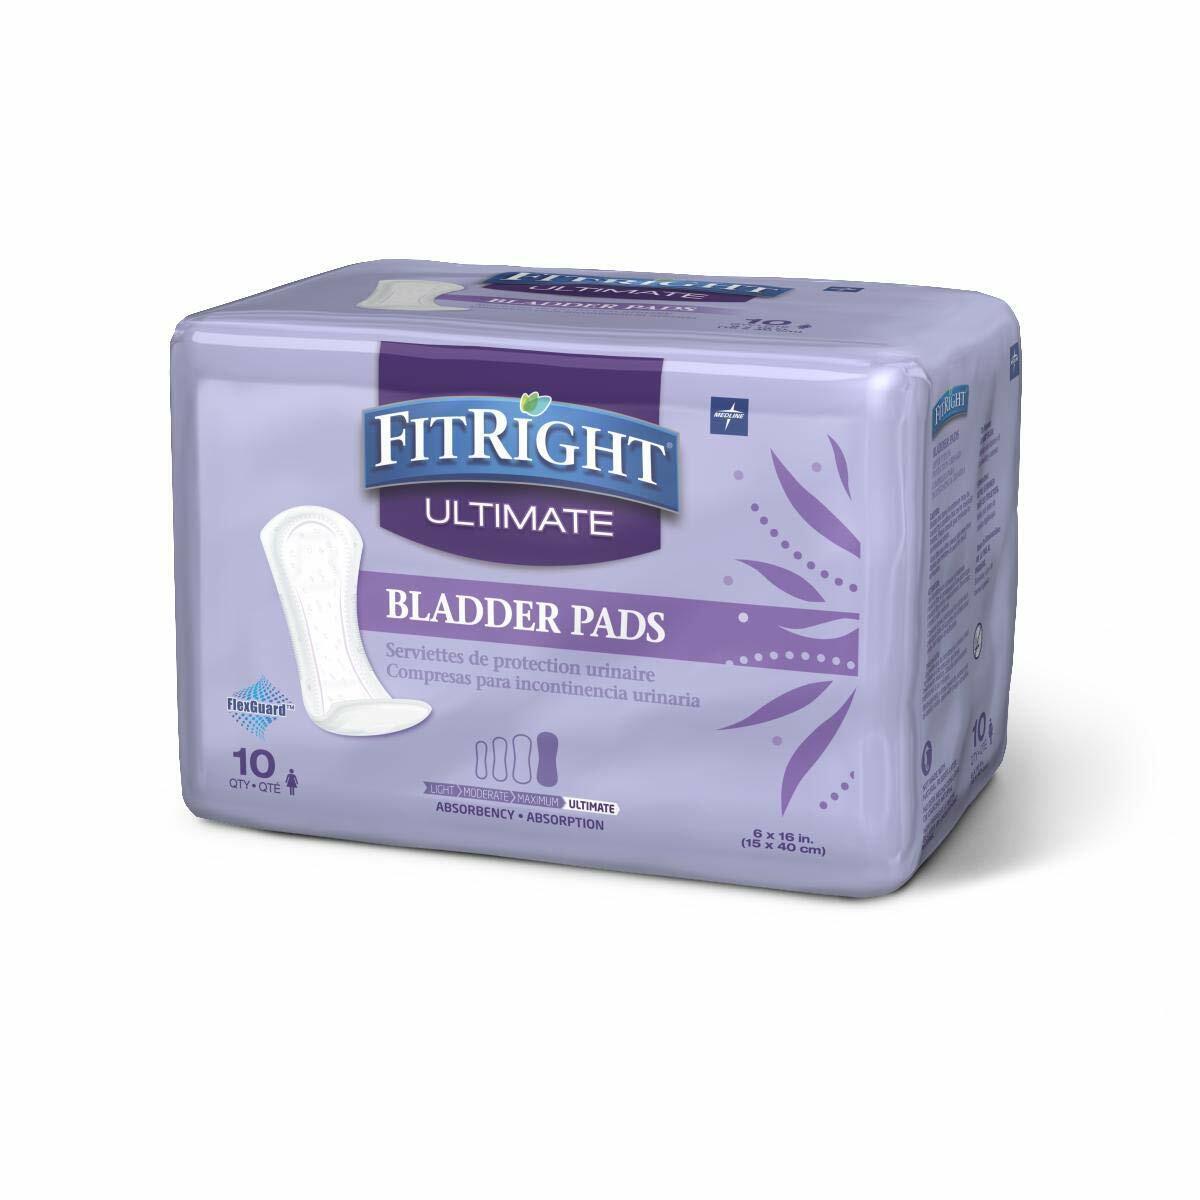 FitRight Incontinence Bladder Control Pads, Light, Moderate, Maximum Ultimate